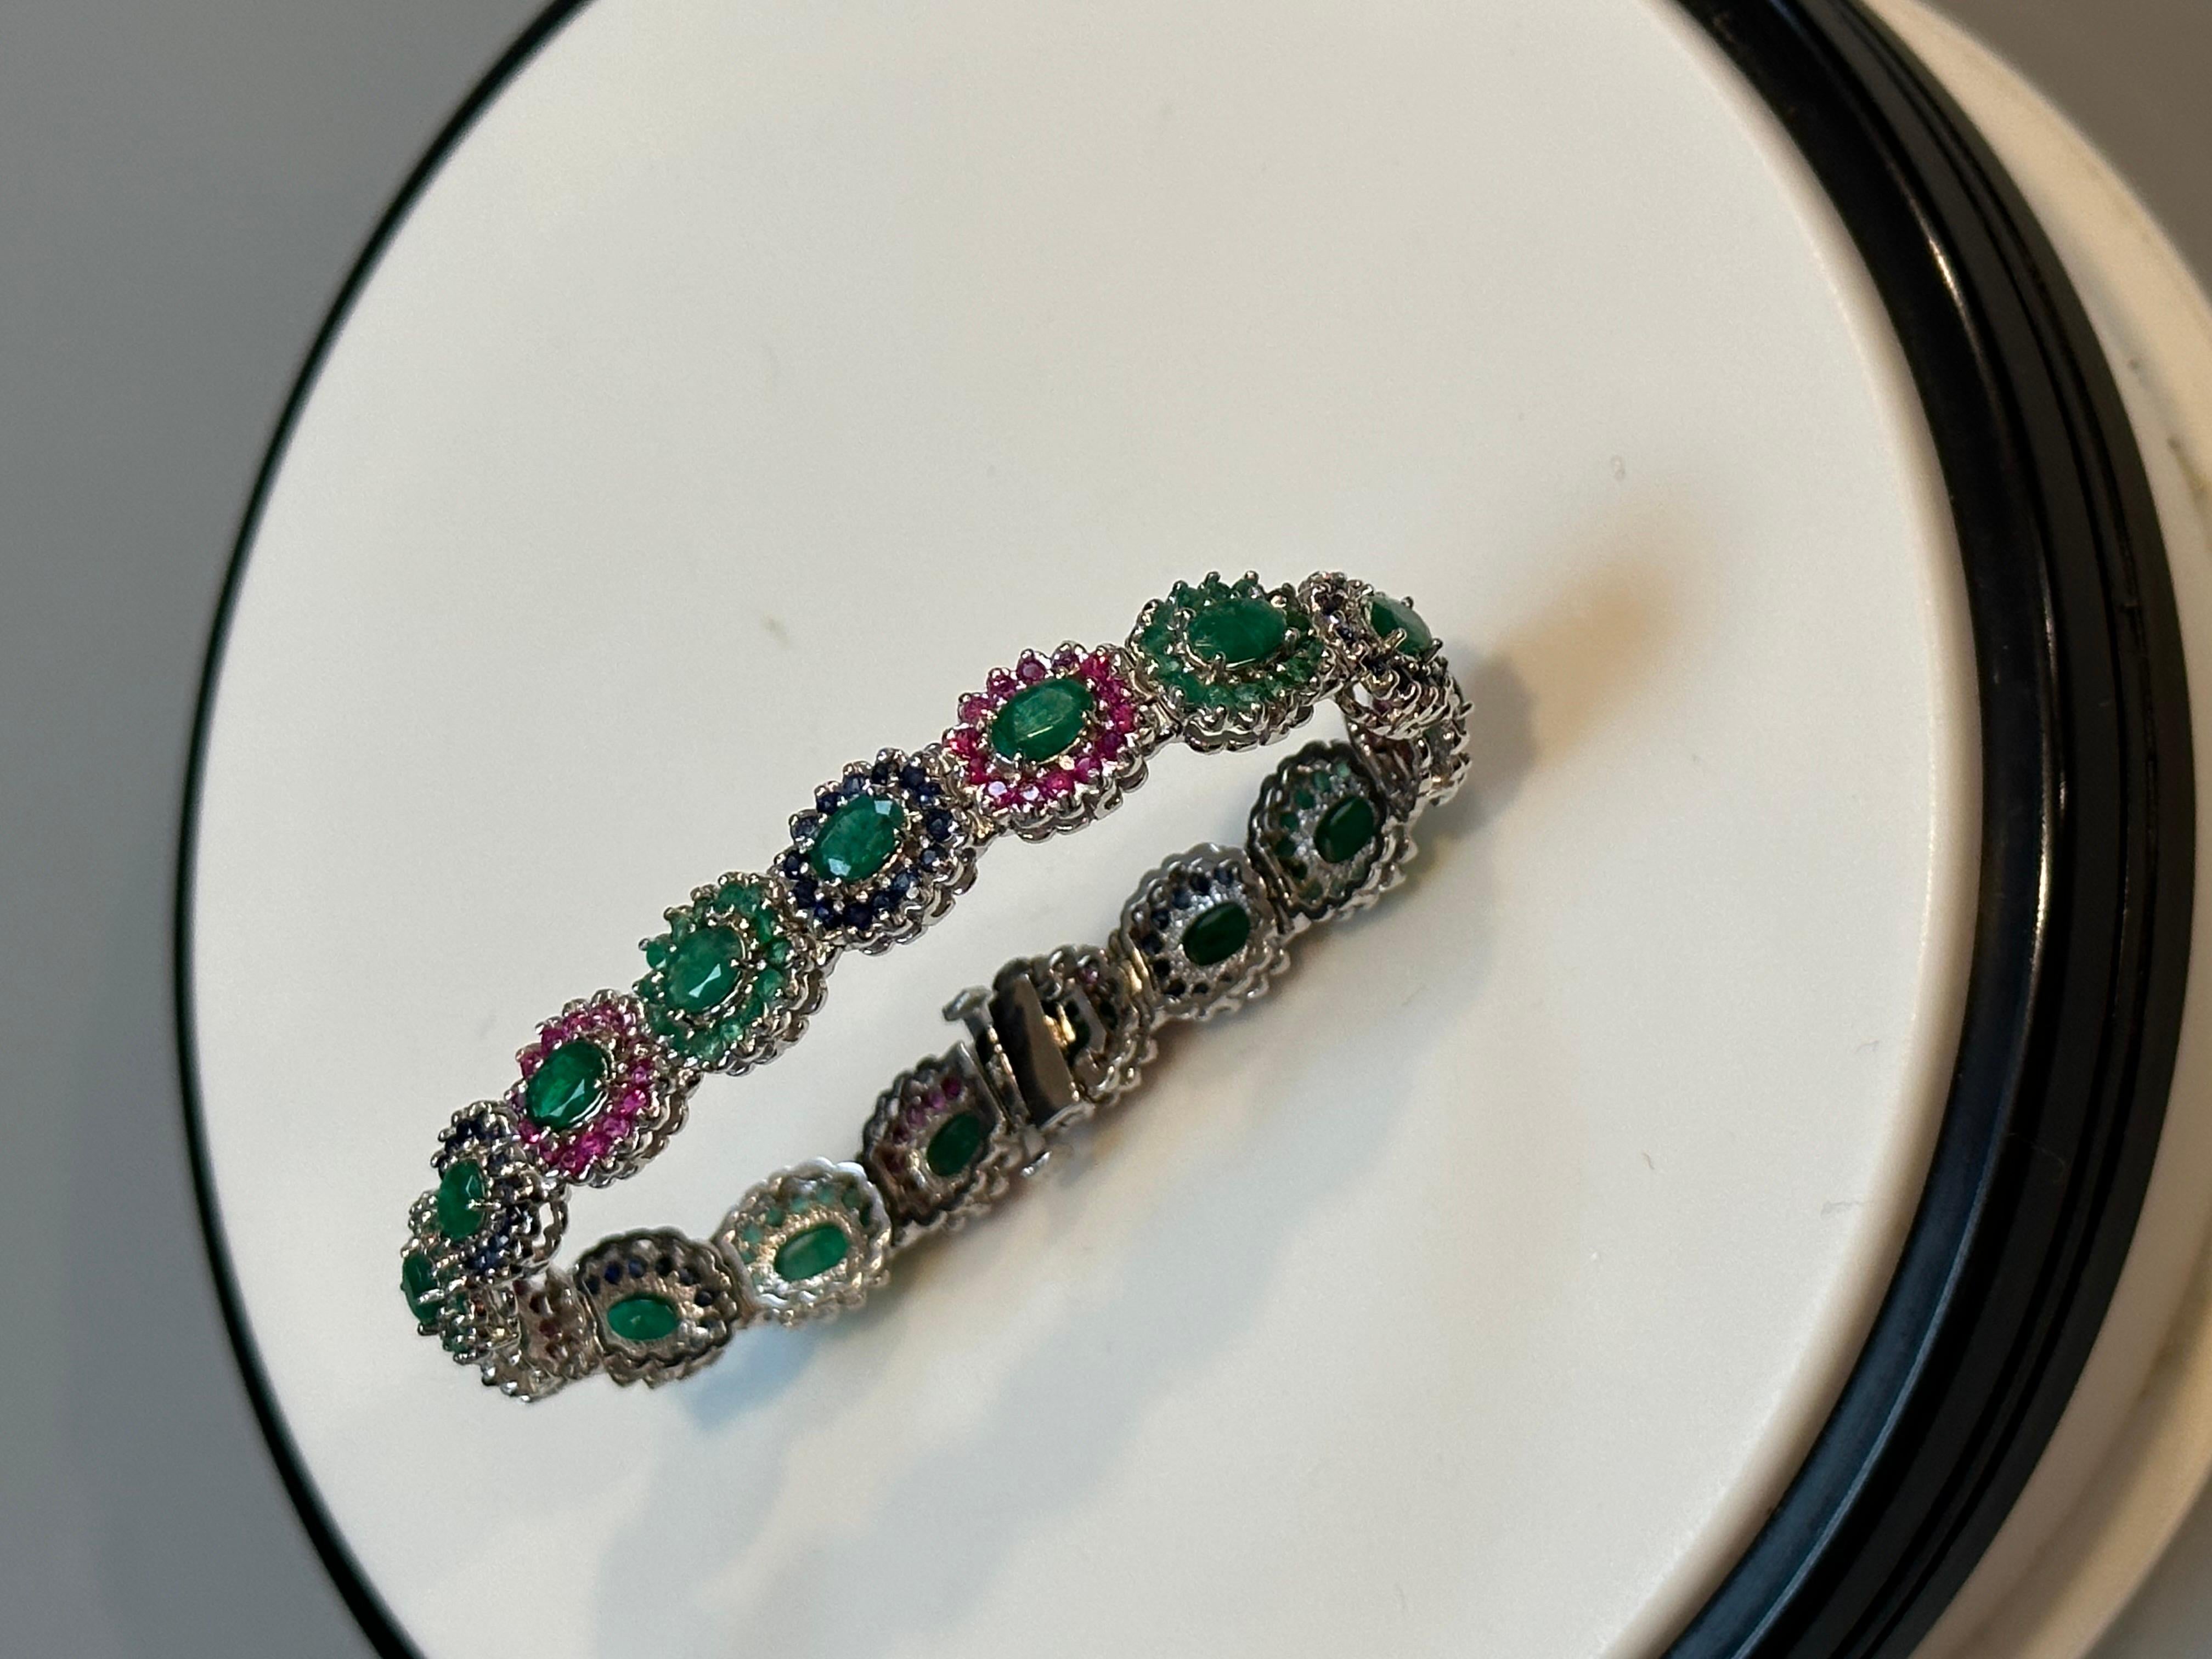 8 Ct Oval Cut Emerald & Ruby & Sapphire Tennis Bracelet 14 Kt White Gold 25.5Gm For Sale 9